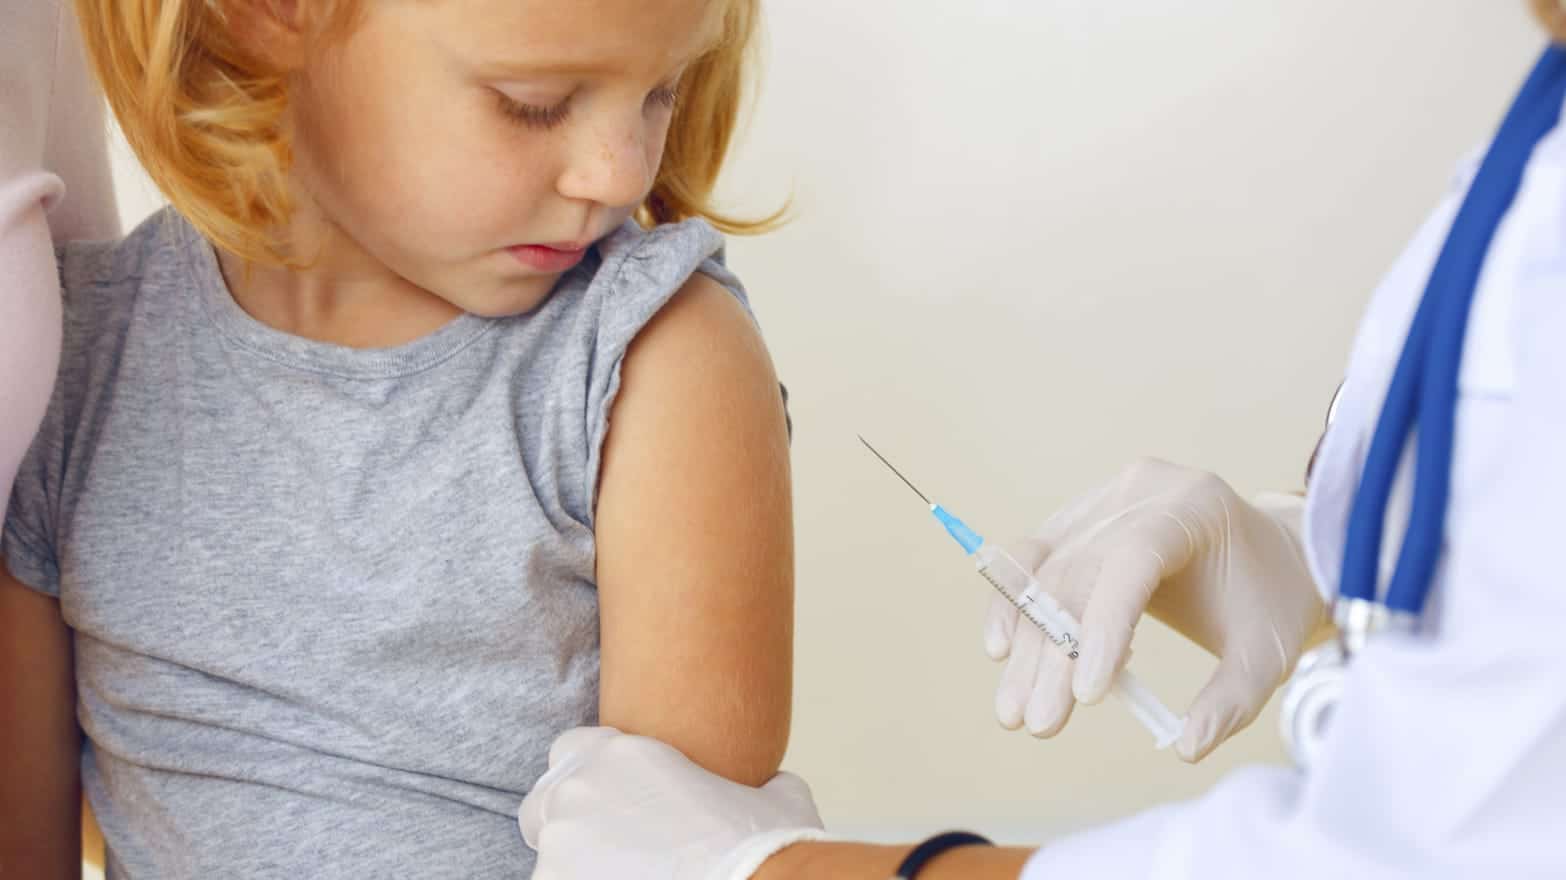 Vaccinations May Get Skipped As Schools Starting Online